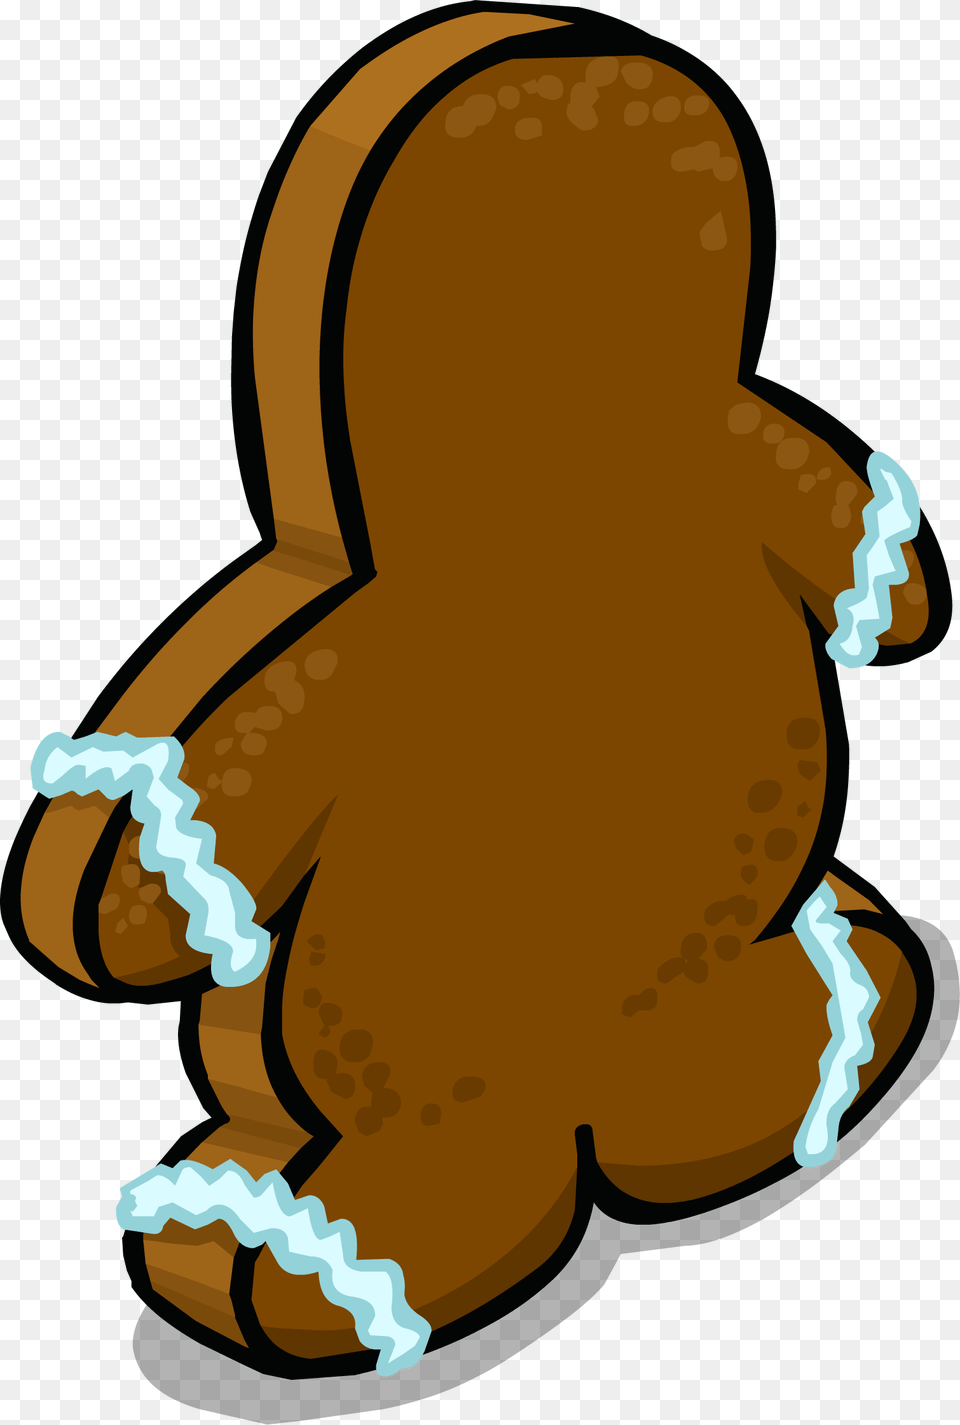 Gingerbread Man Sprite 003 Portable Network Graphics, Food, Sweets, Clothing, Glove Png